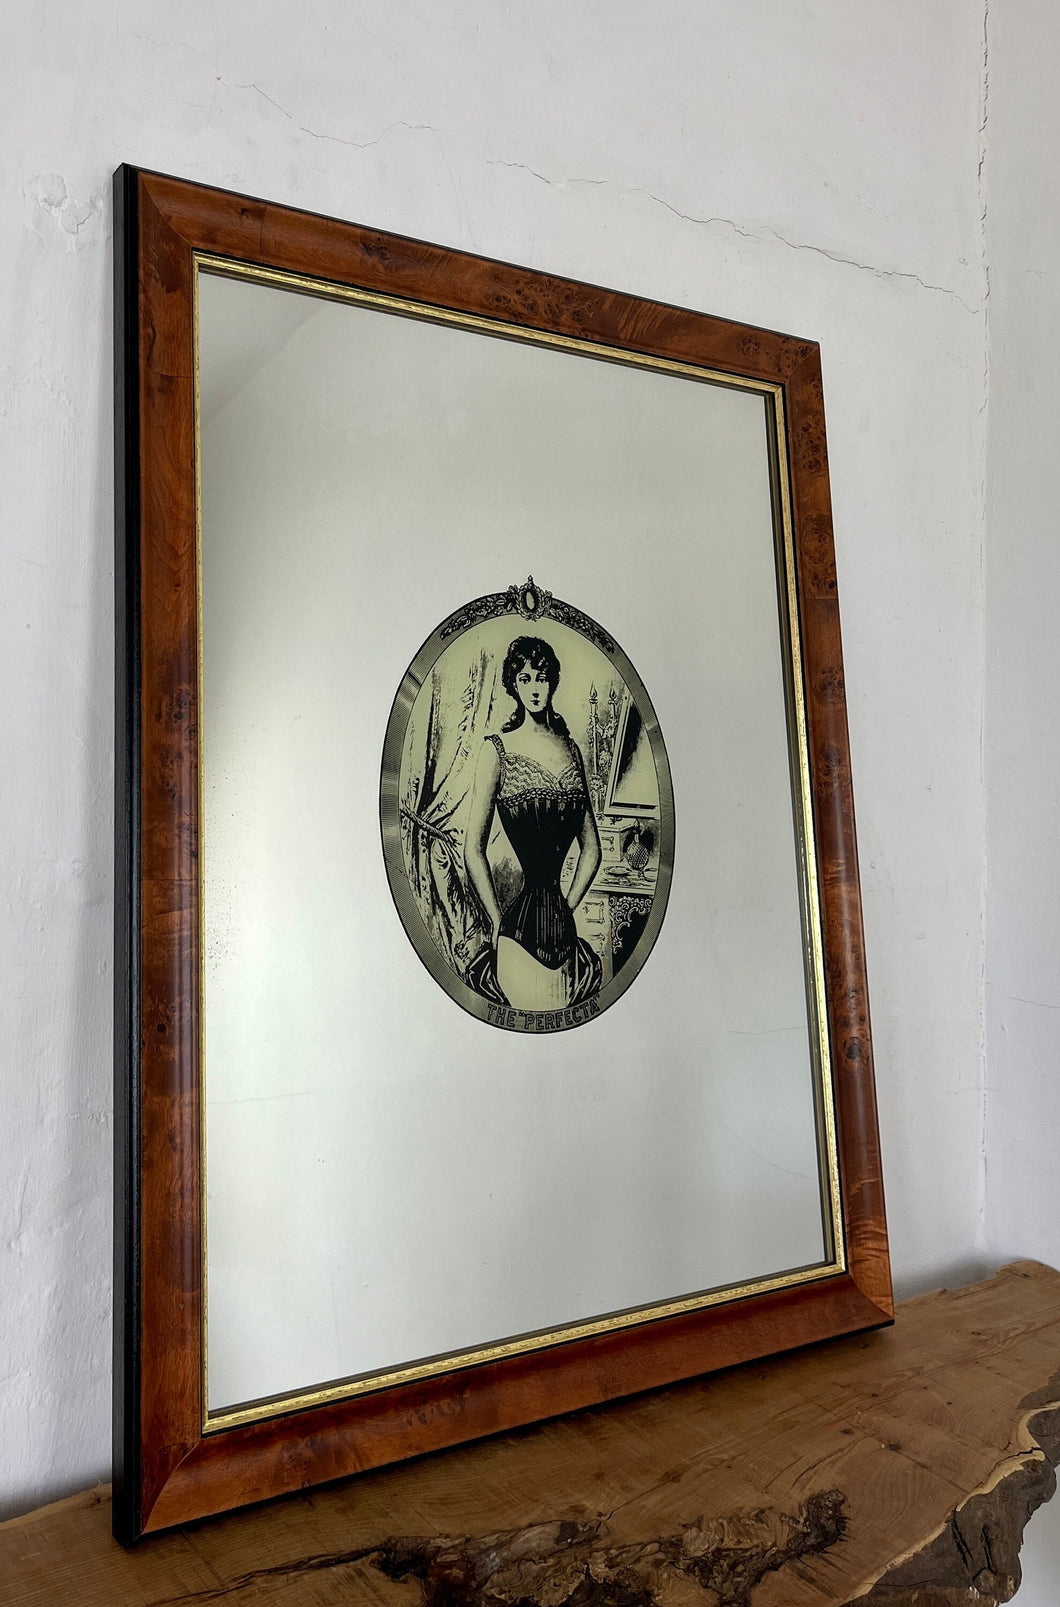 The mirror depicts a glamorous Victorian lady in an oval design with a noir effect, and it includes intricate details and a provocative finish. The walnut frame is of high quality and dates back to the 1920s.